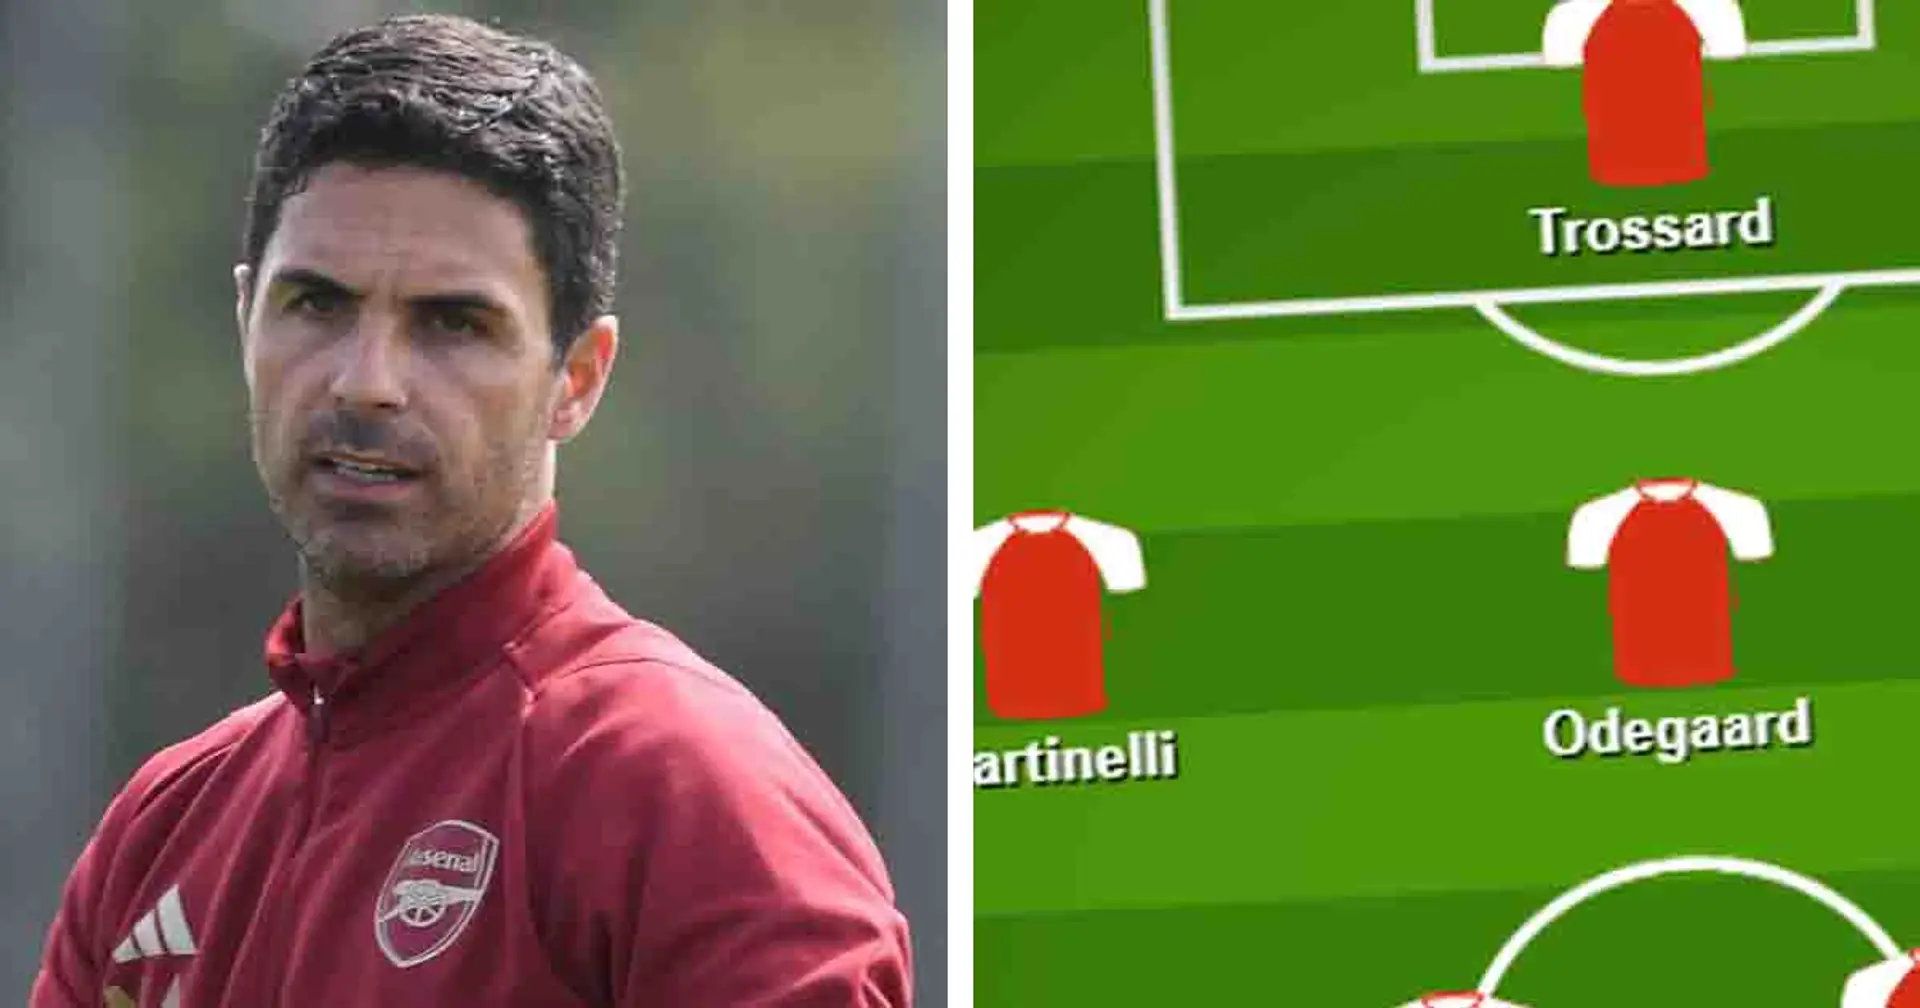 'Trossard deserves to start': Arsenal fans name ultimate XI for Fulham clash